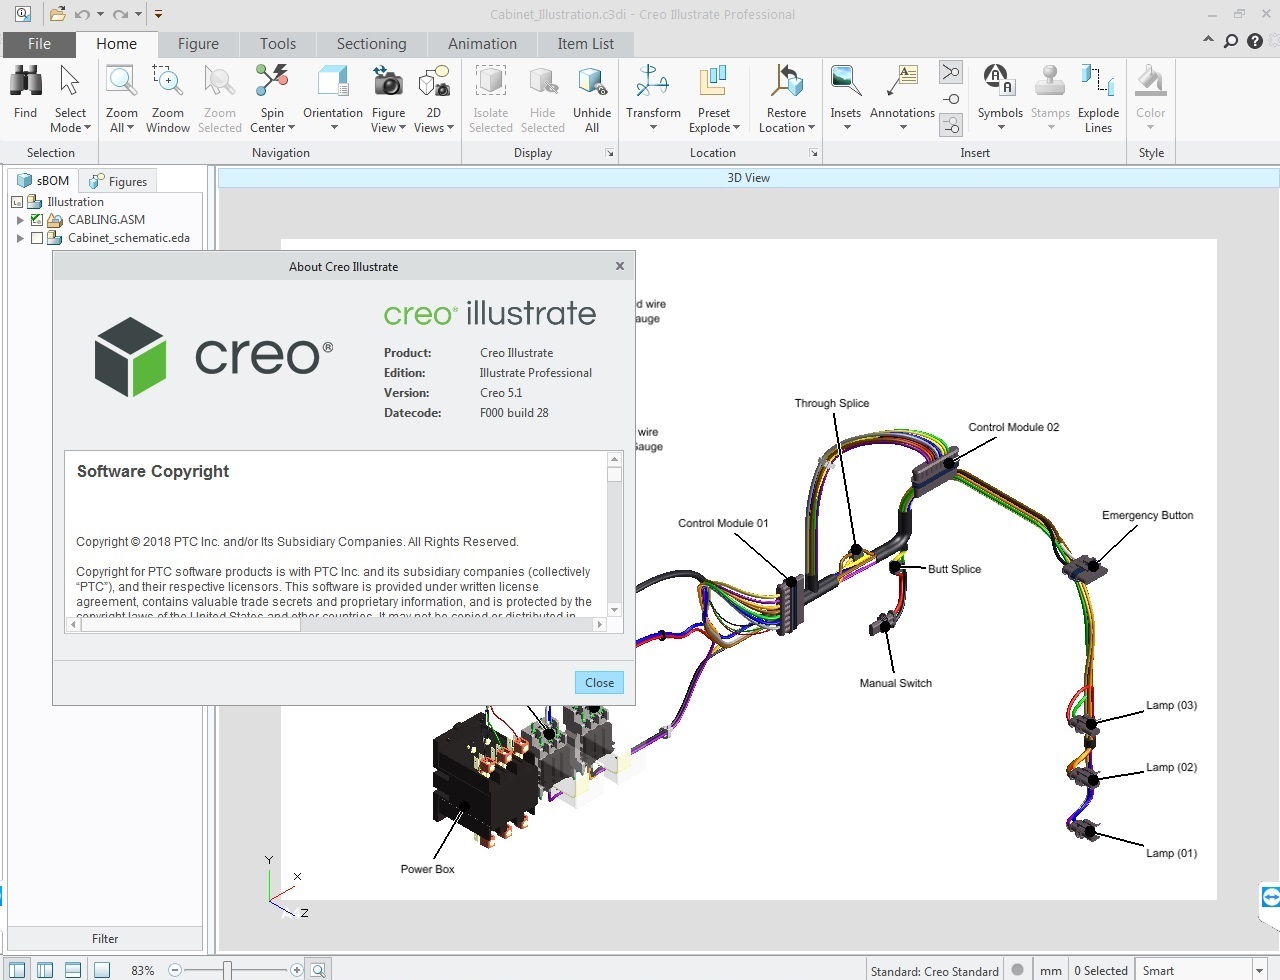 Working with PTC Creo Illustrate 5.1 F000 full license